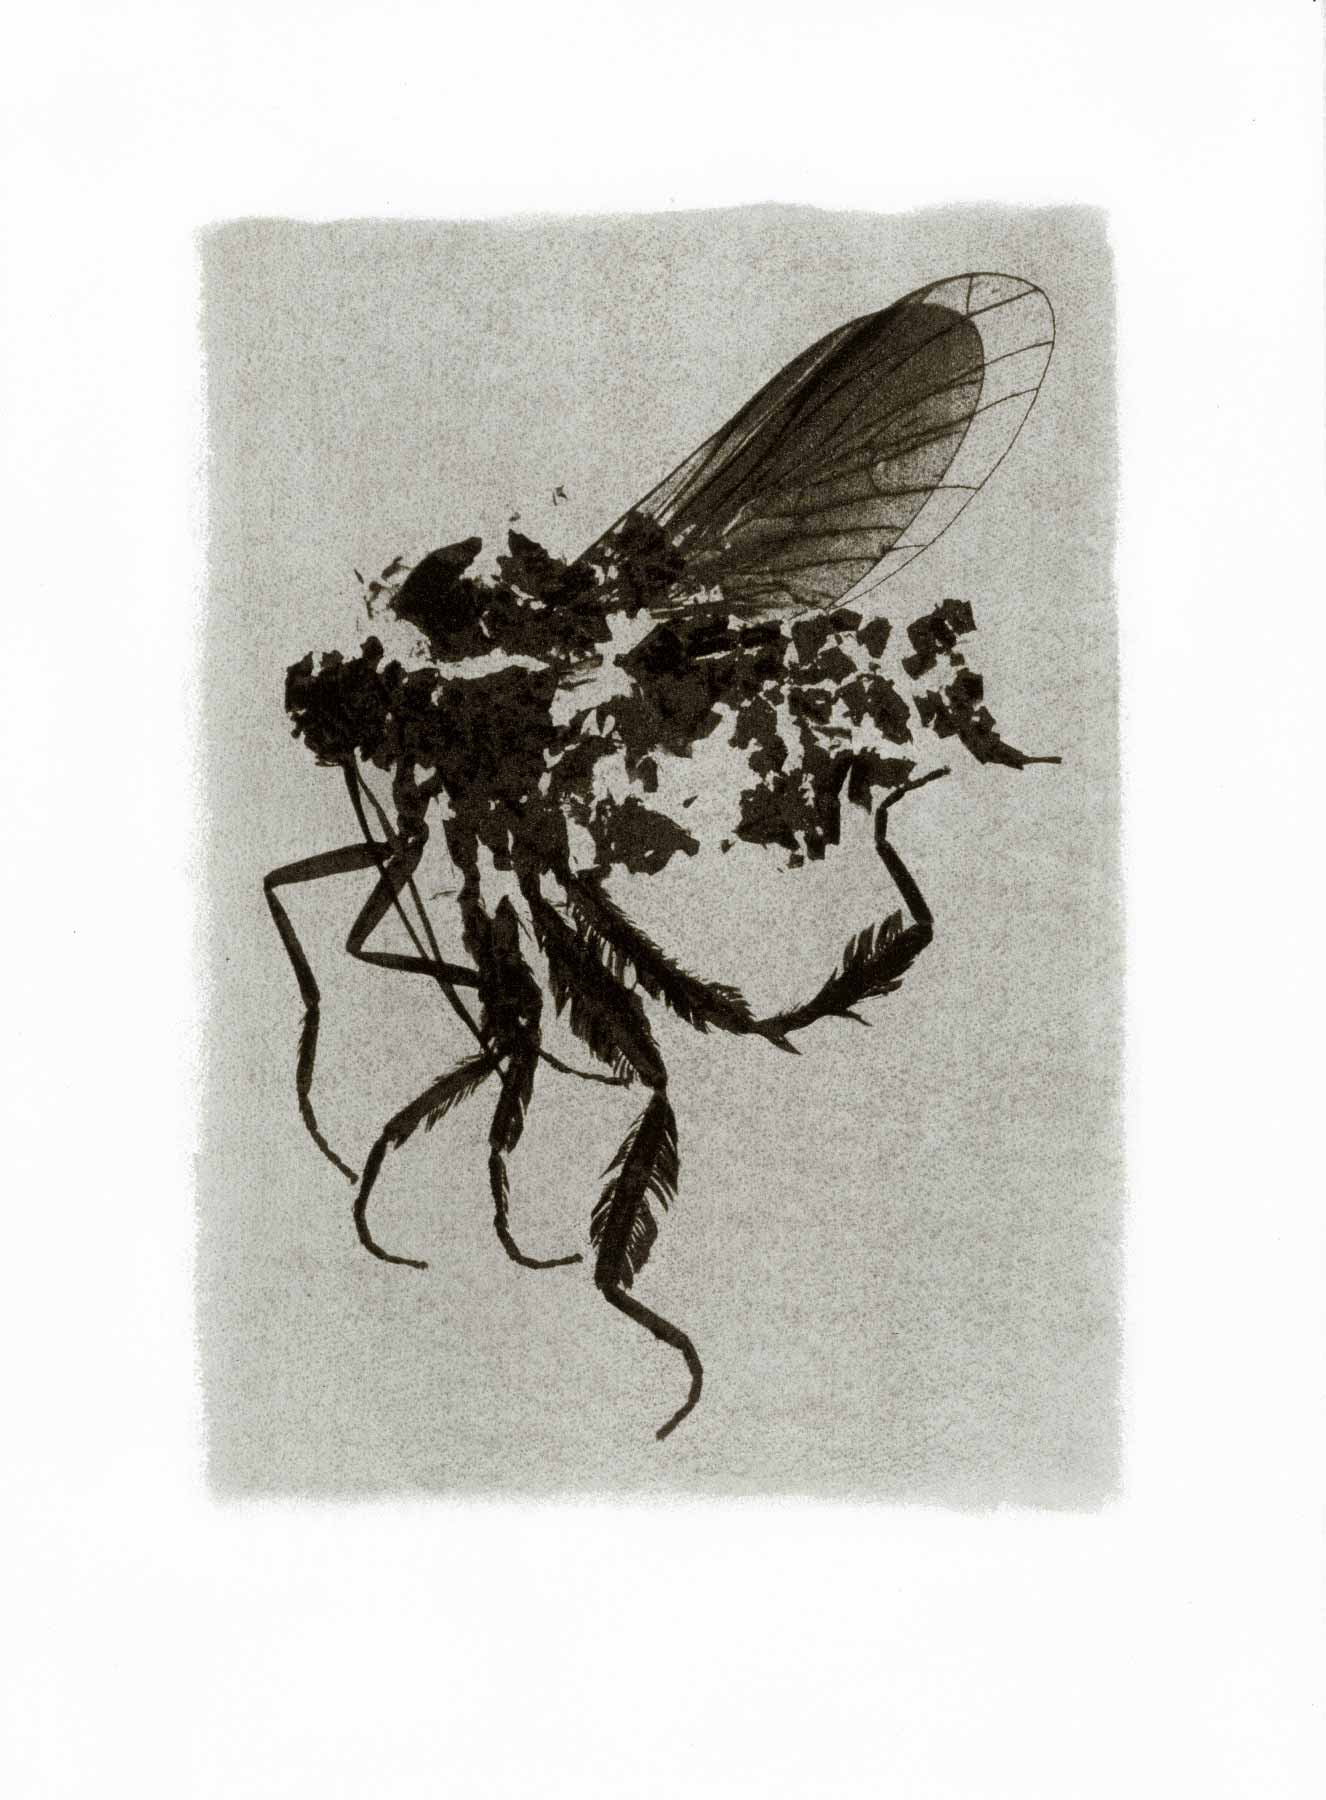 Gum bichromate insect - Unknown Insect 1994